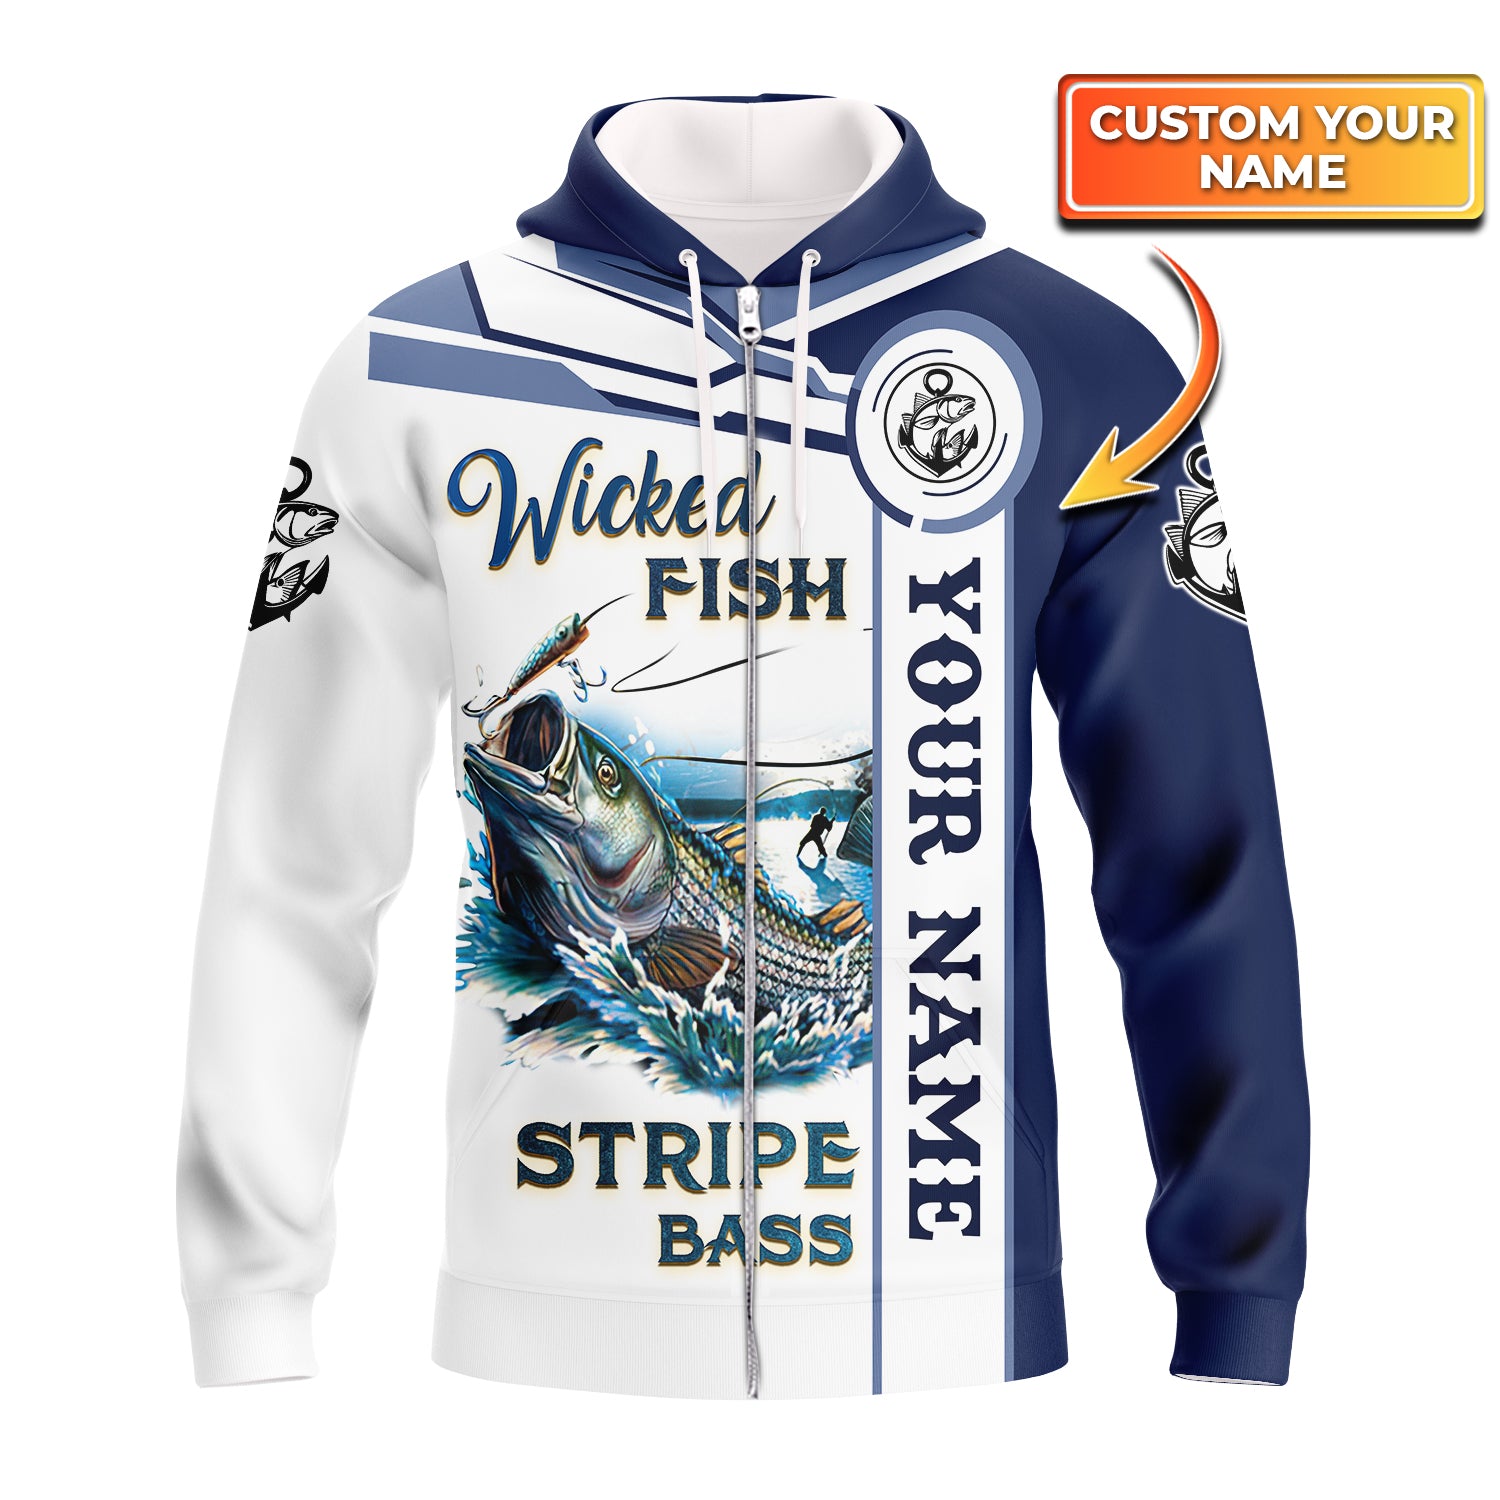 Wicked Fish Striped Bass - Personalized Name 3D Zipper hoodie - QB95